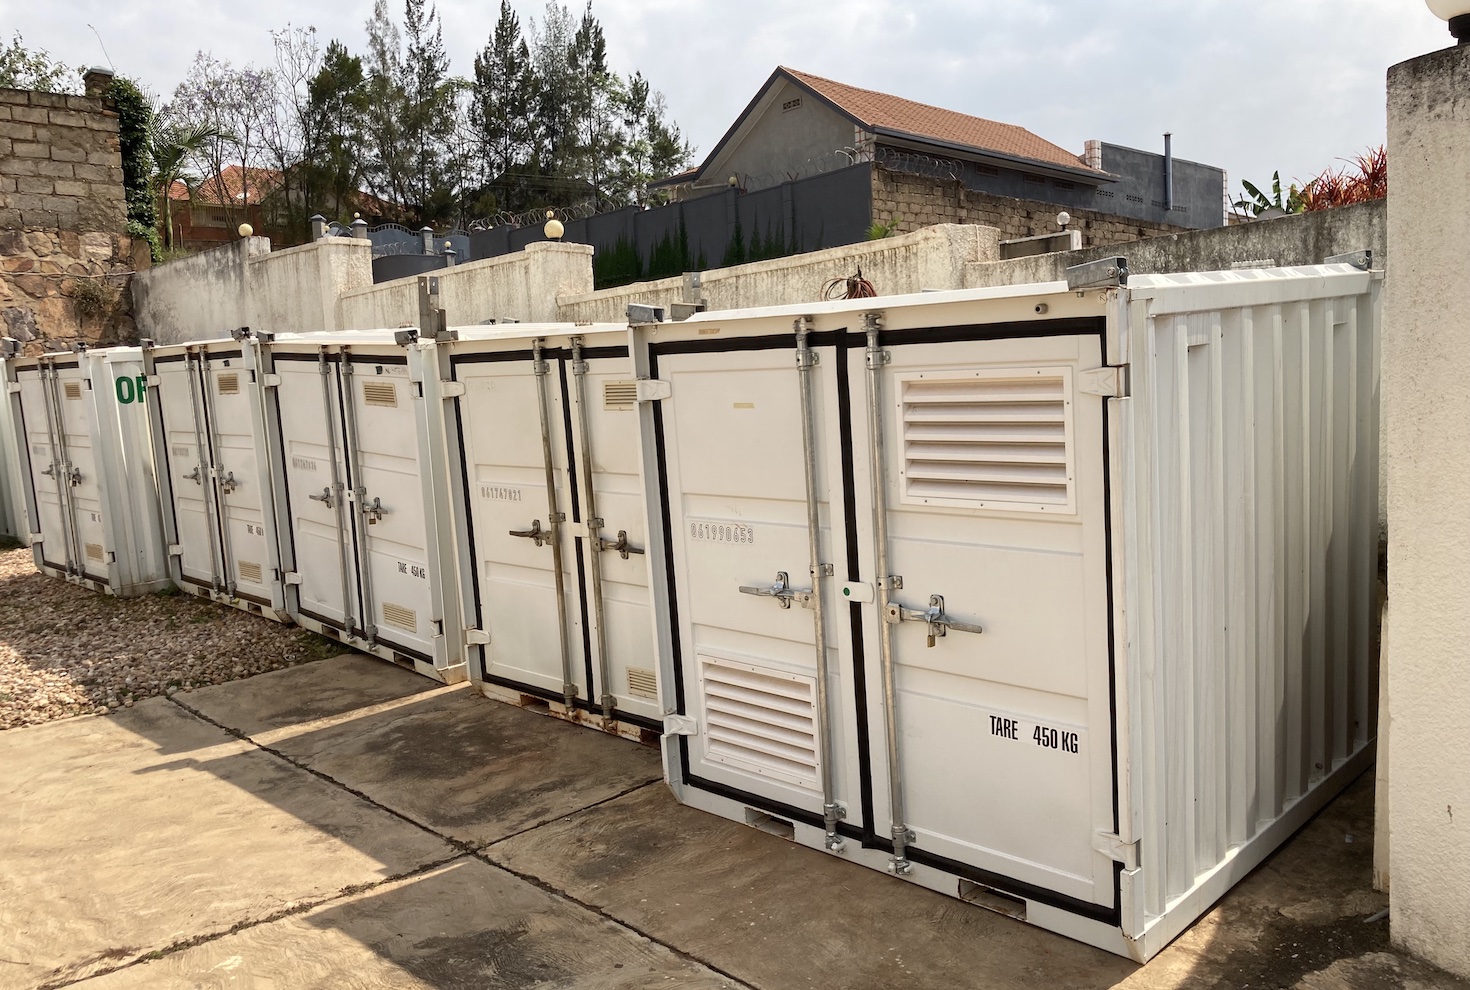 OffGridBoxes (“Boxes”) ready for deployment at the Rwandan headquarters. Photo by Sam Miles